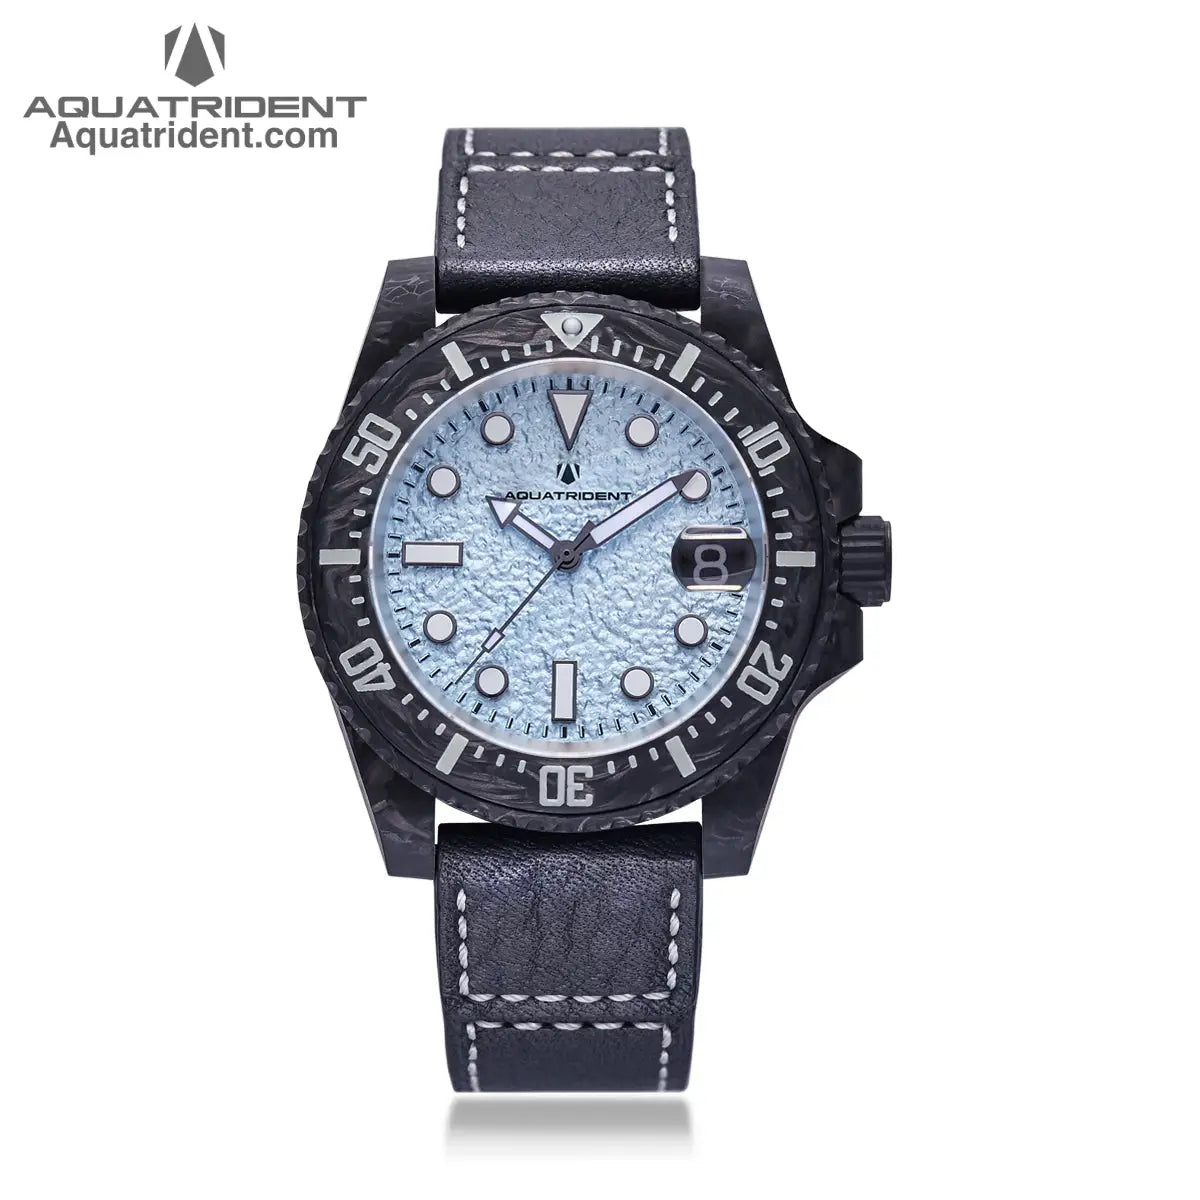 Neptune Carbon Fiber Watch. Blue Ice Dial/ Genuine Leather40Mm. Aq - 23009 - 04A